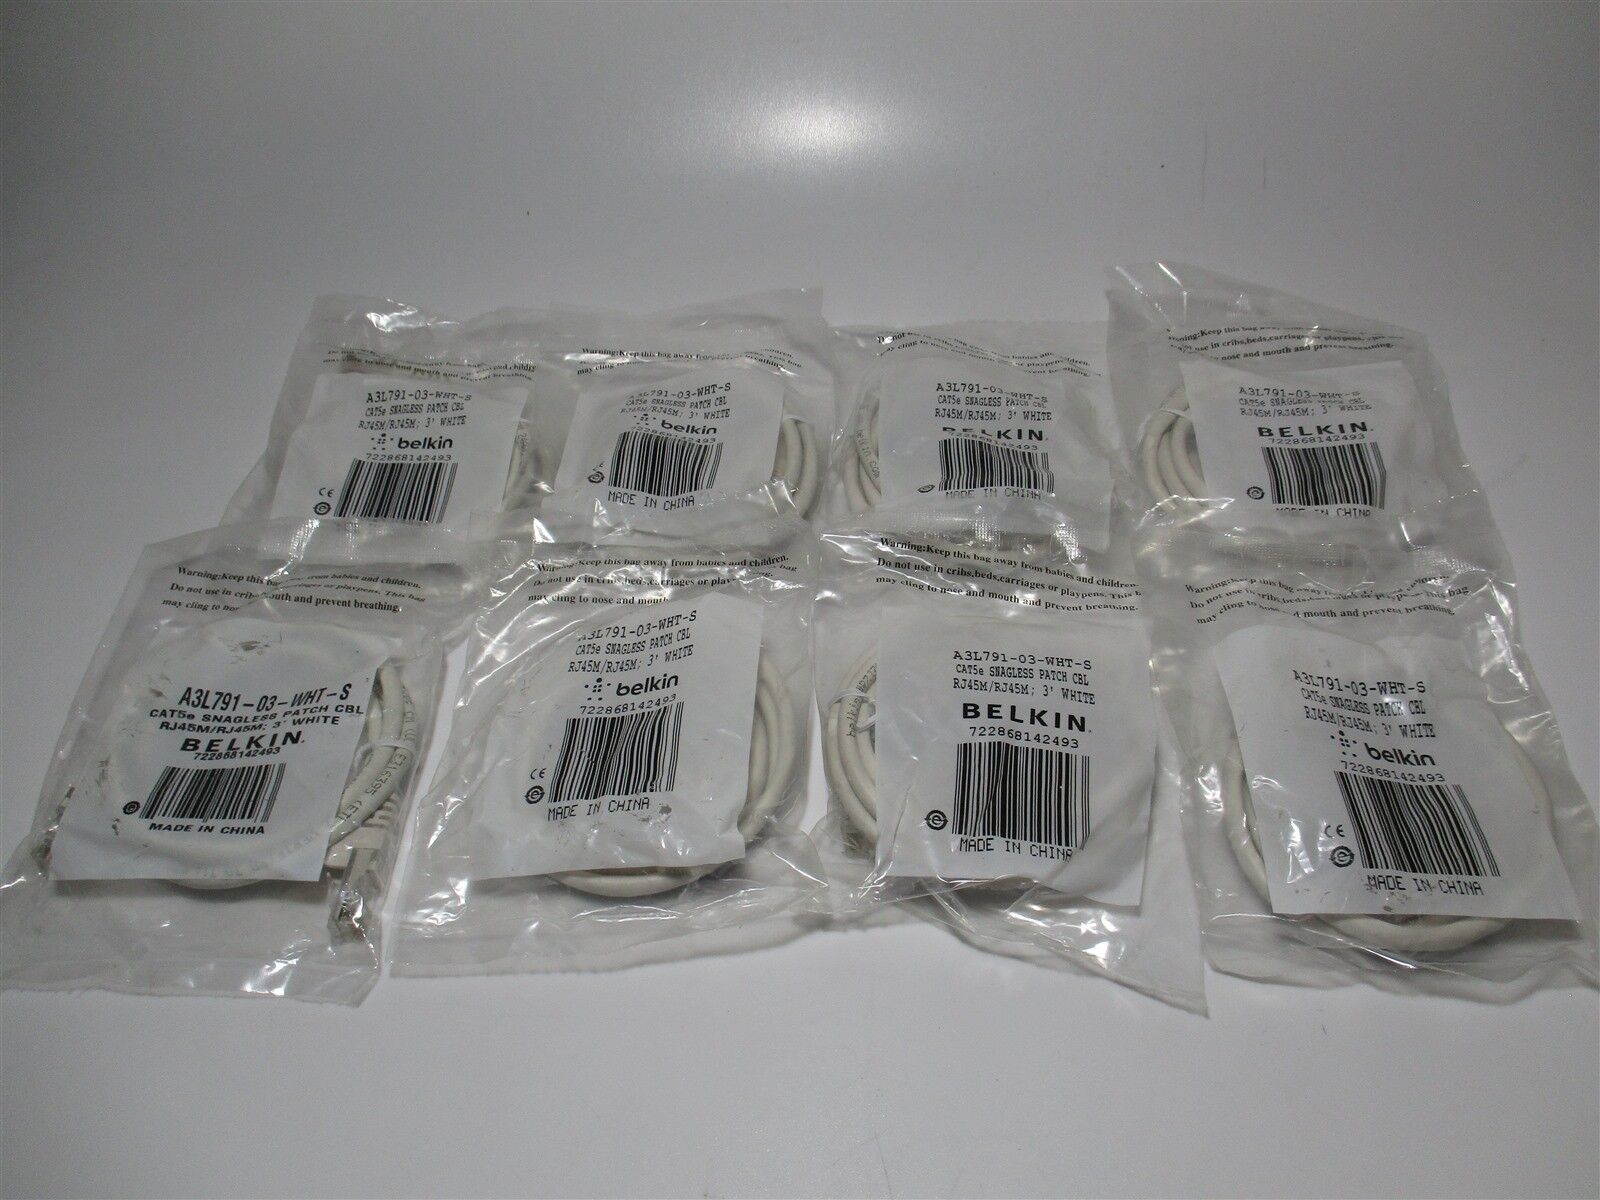 Belkin (A3L791-03-WHT-S) 3-Ft White CAT5e RJ45 Network Patch Cable - Lot of 8